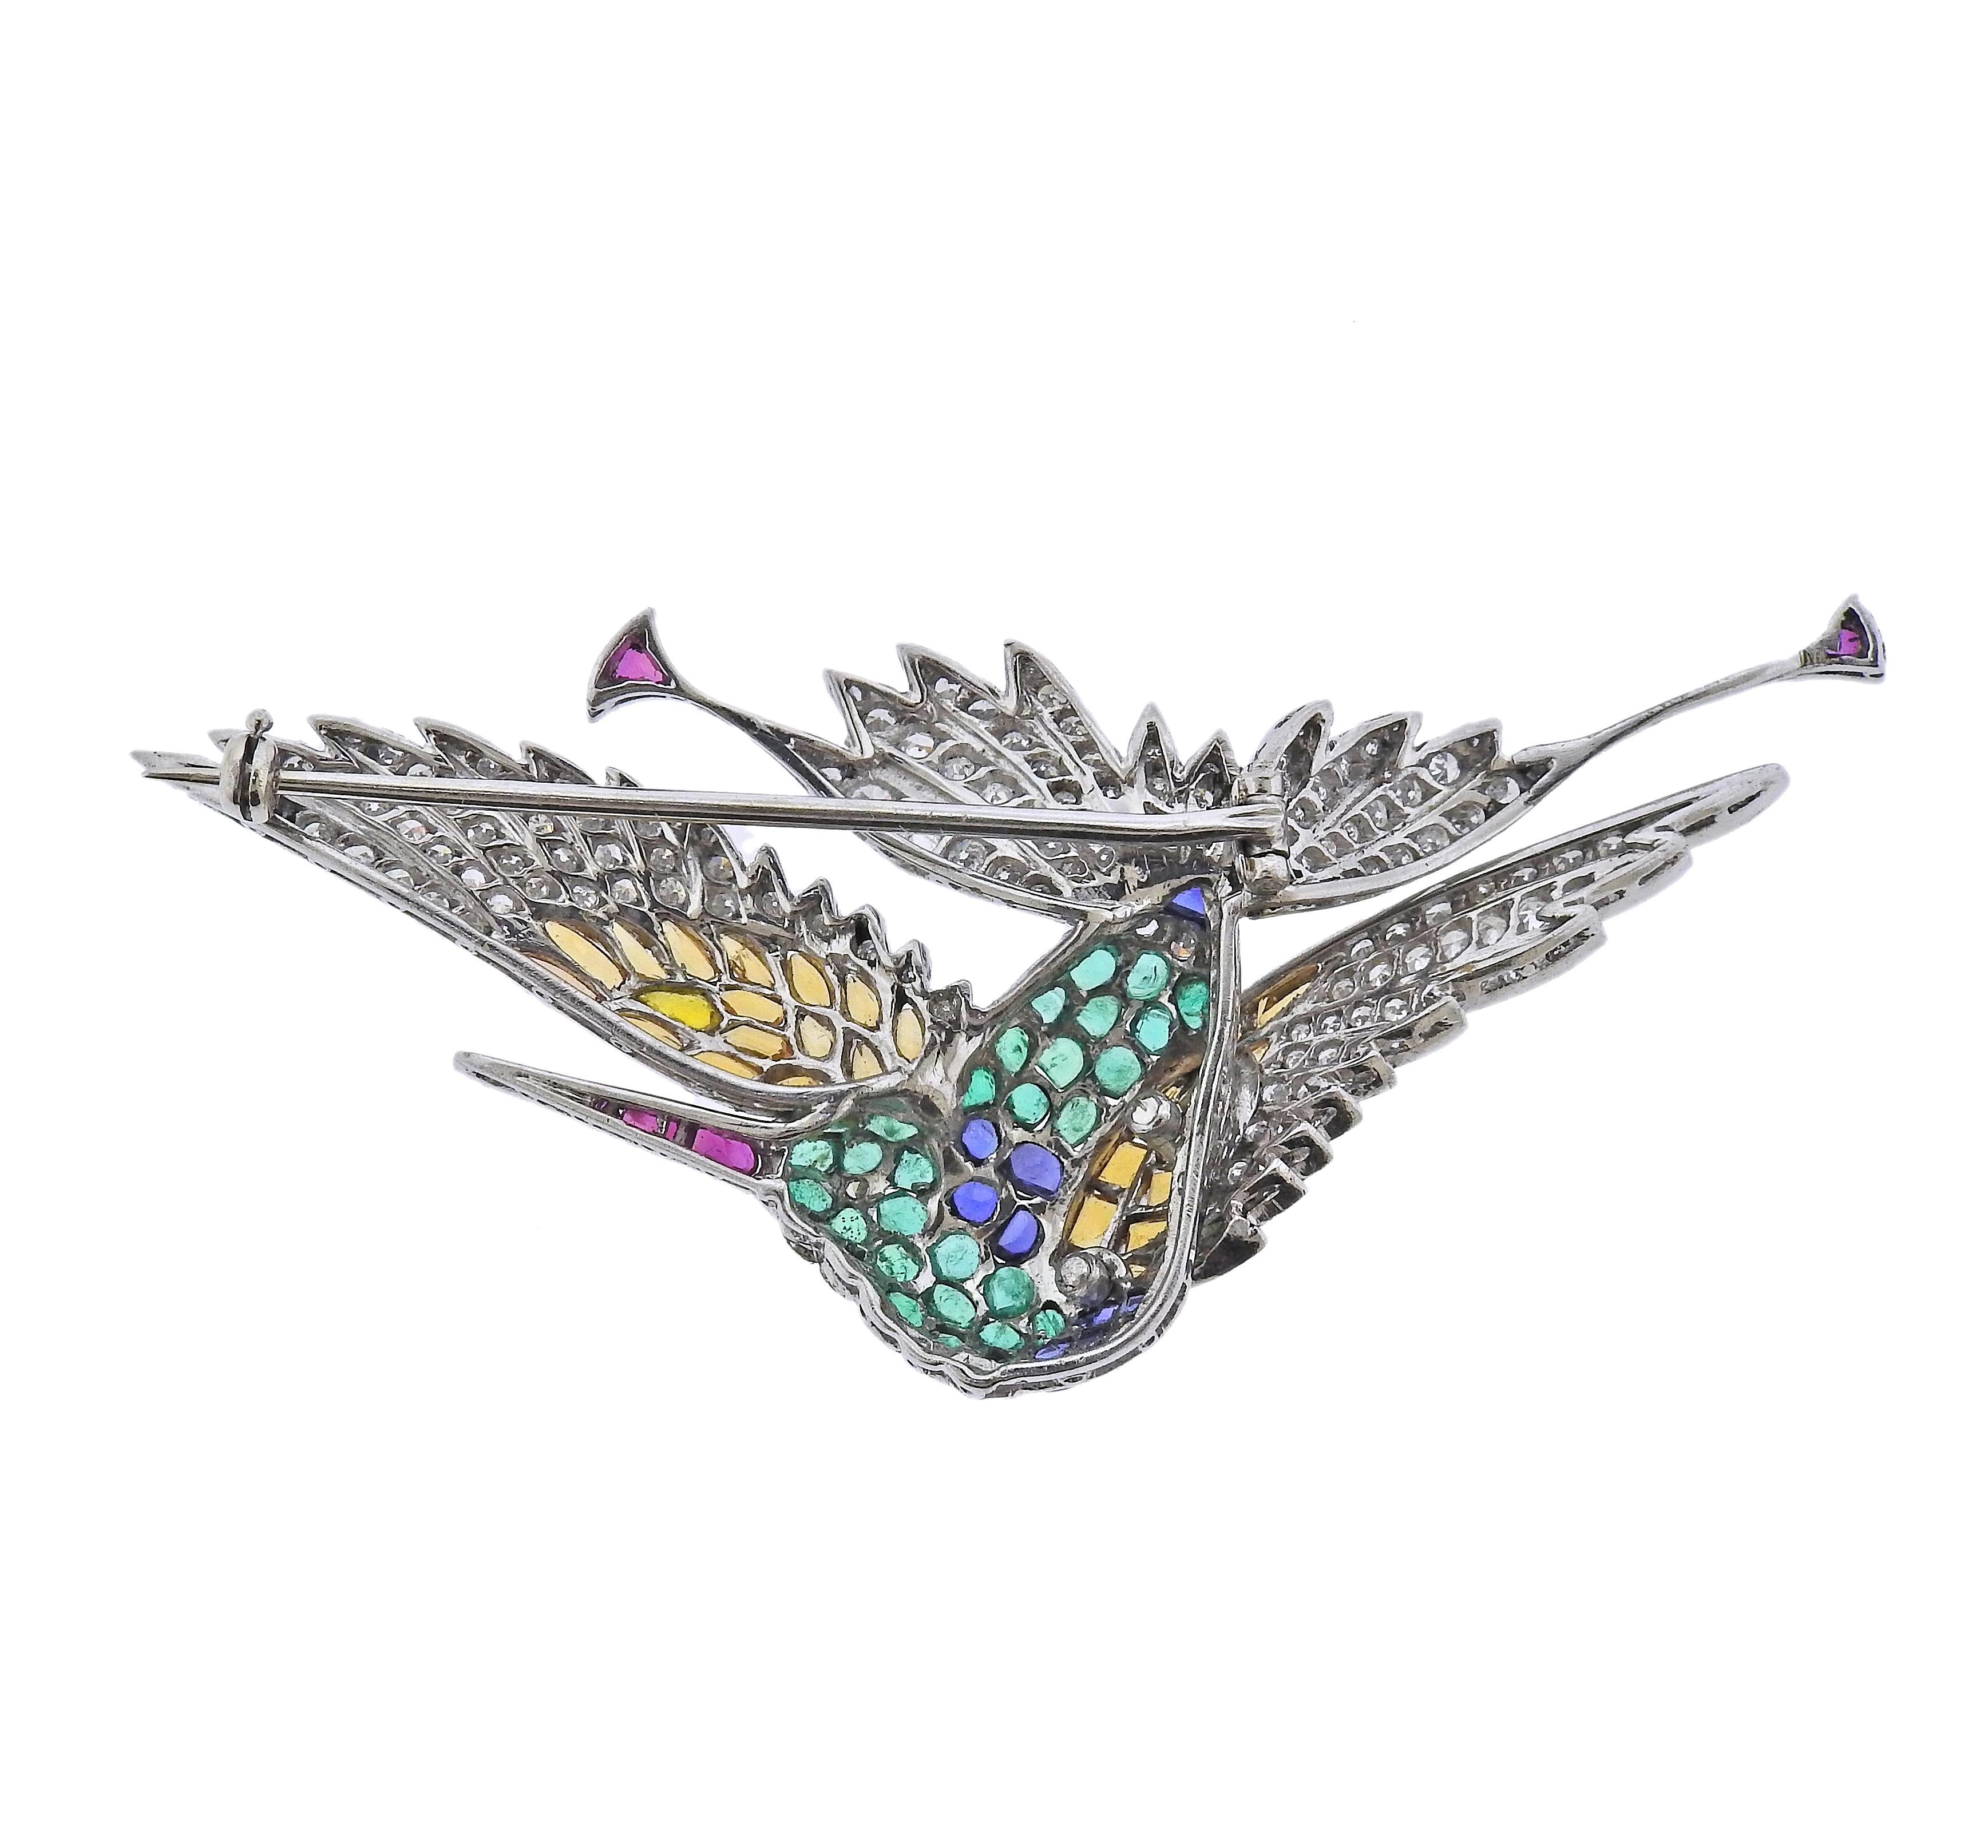 Antique platinum bird brooch, adorned with rubies, emeralds, sapphires, citrines and approx. 0.60ctw in diamonds. Brooch measures 2 5/8